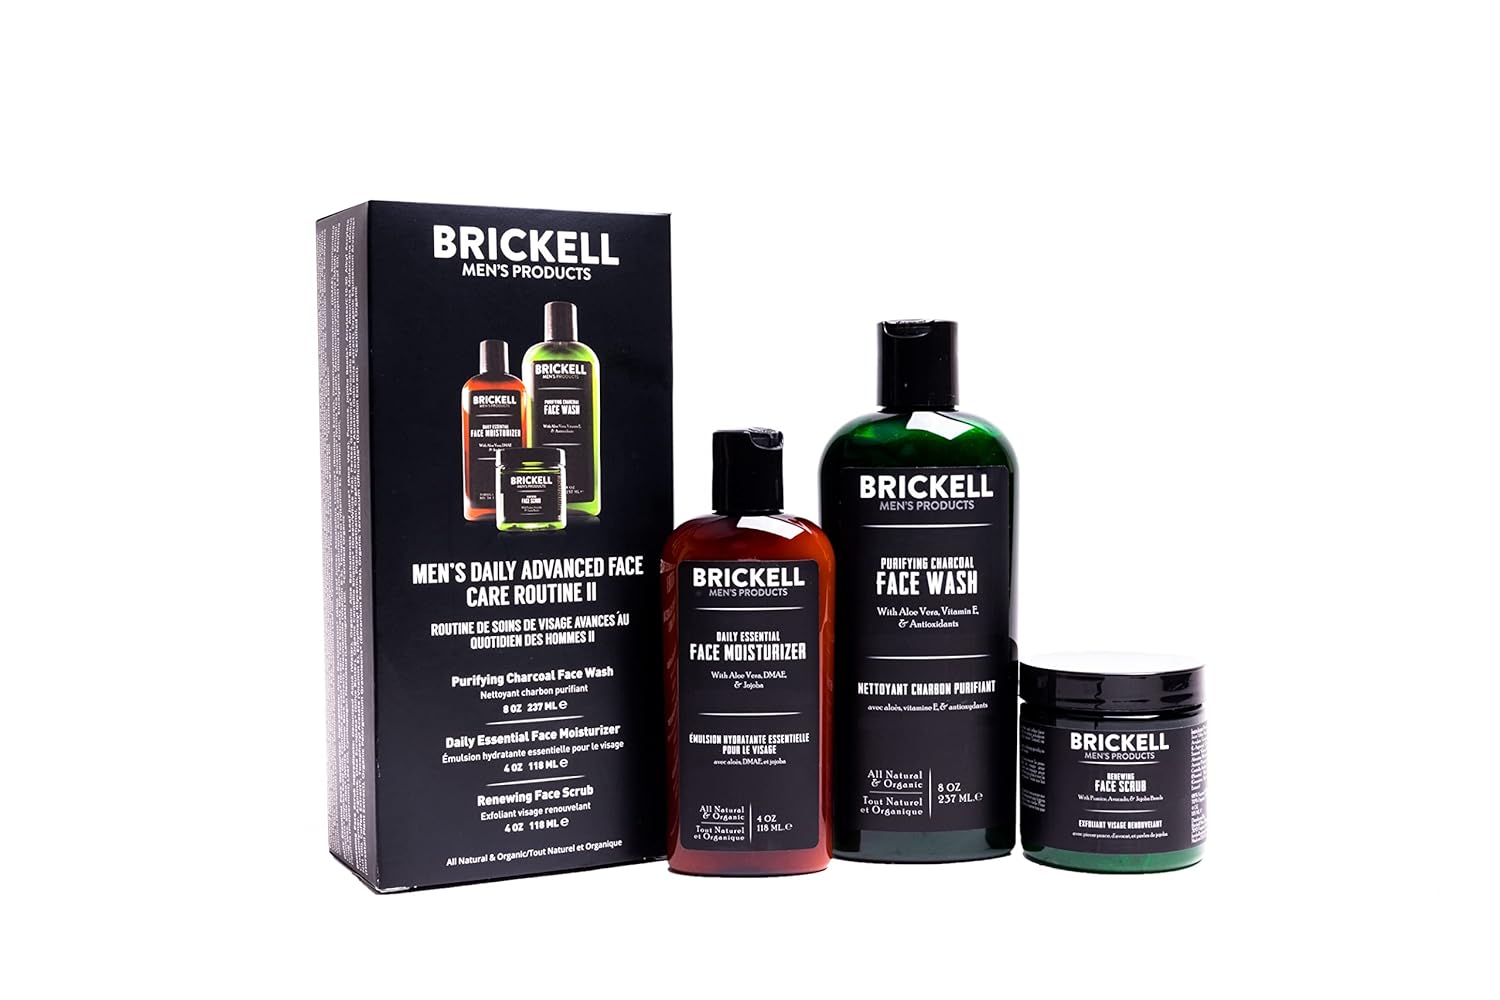 Brickell Mens Daily Advanced Face Care Routine II, Activated Charcoal Facial Cleanser, Face Scrub, Face Moisturizer Lotion, Natural and Organic, Scented